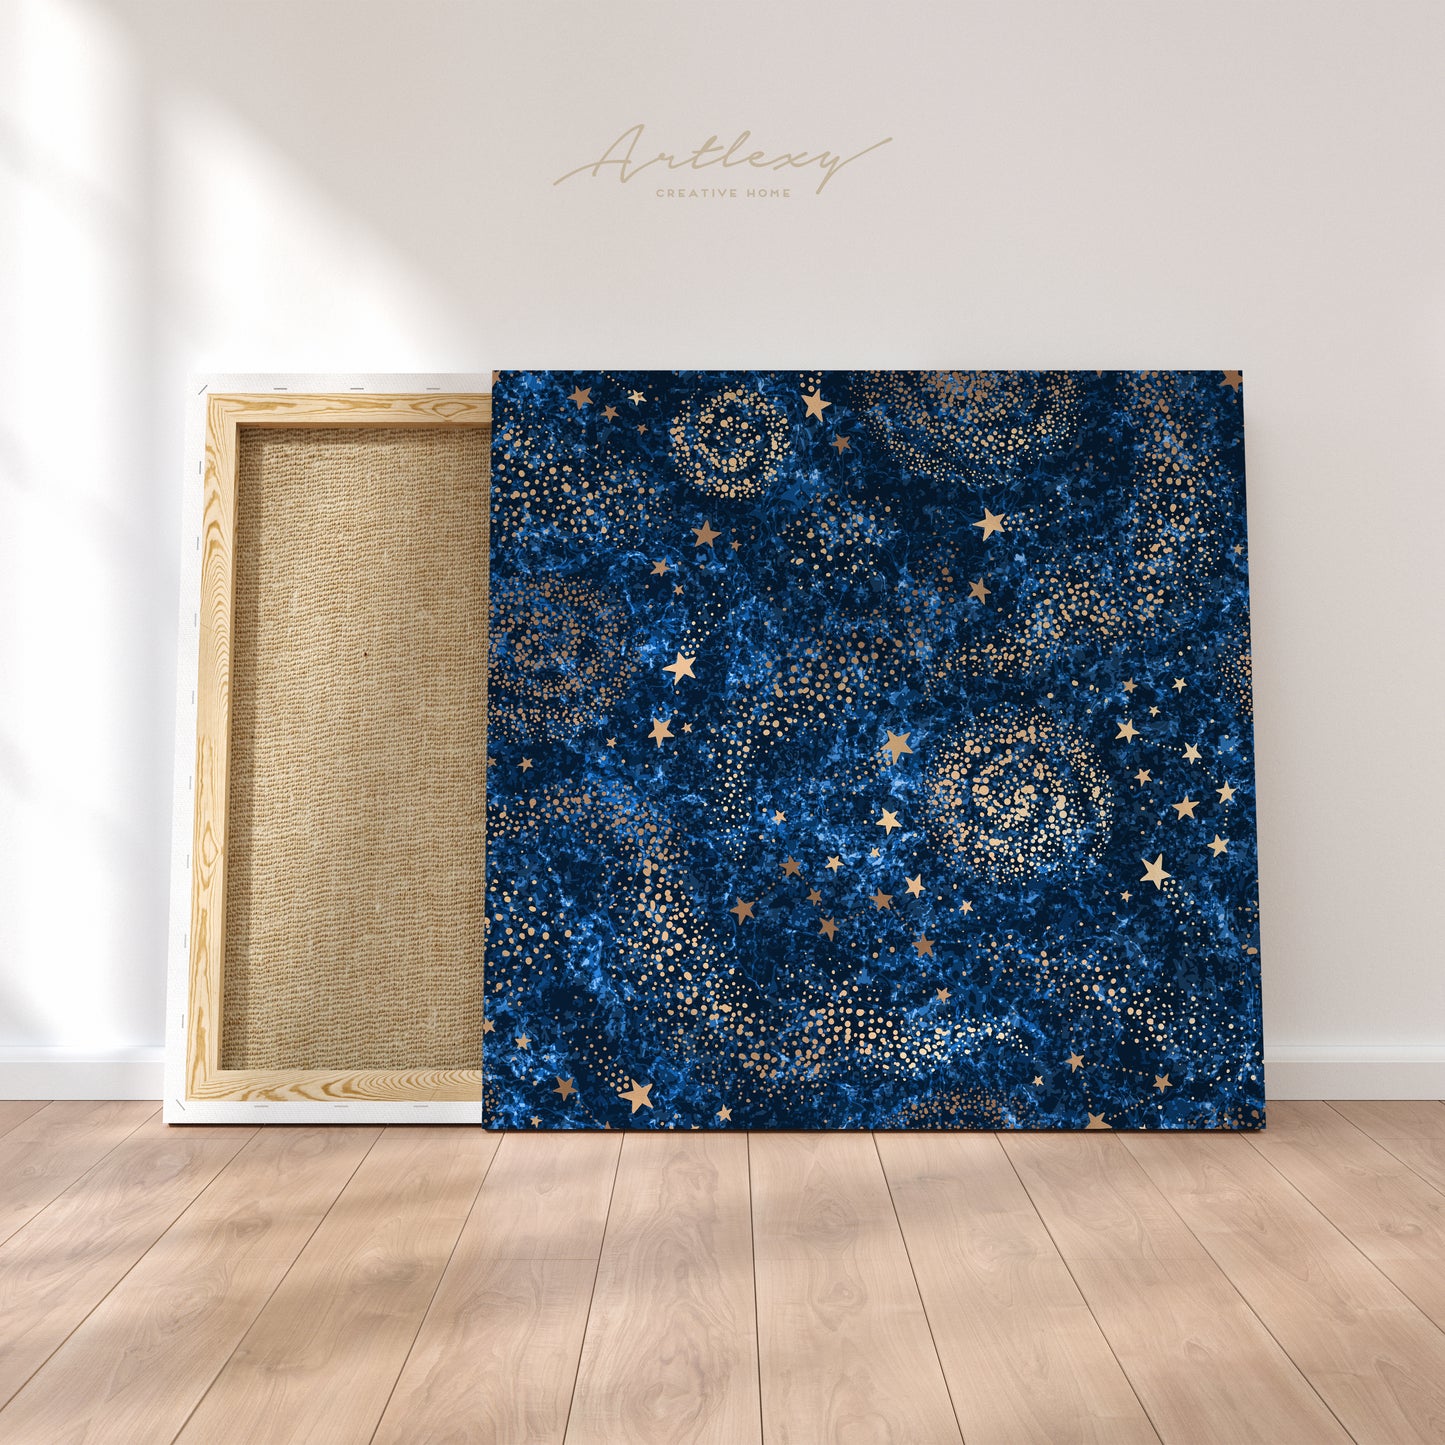 Abstract Galaxy with Gold Stars Canvas Print ArtLexy 1 Panel 12"x12" inches 